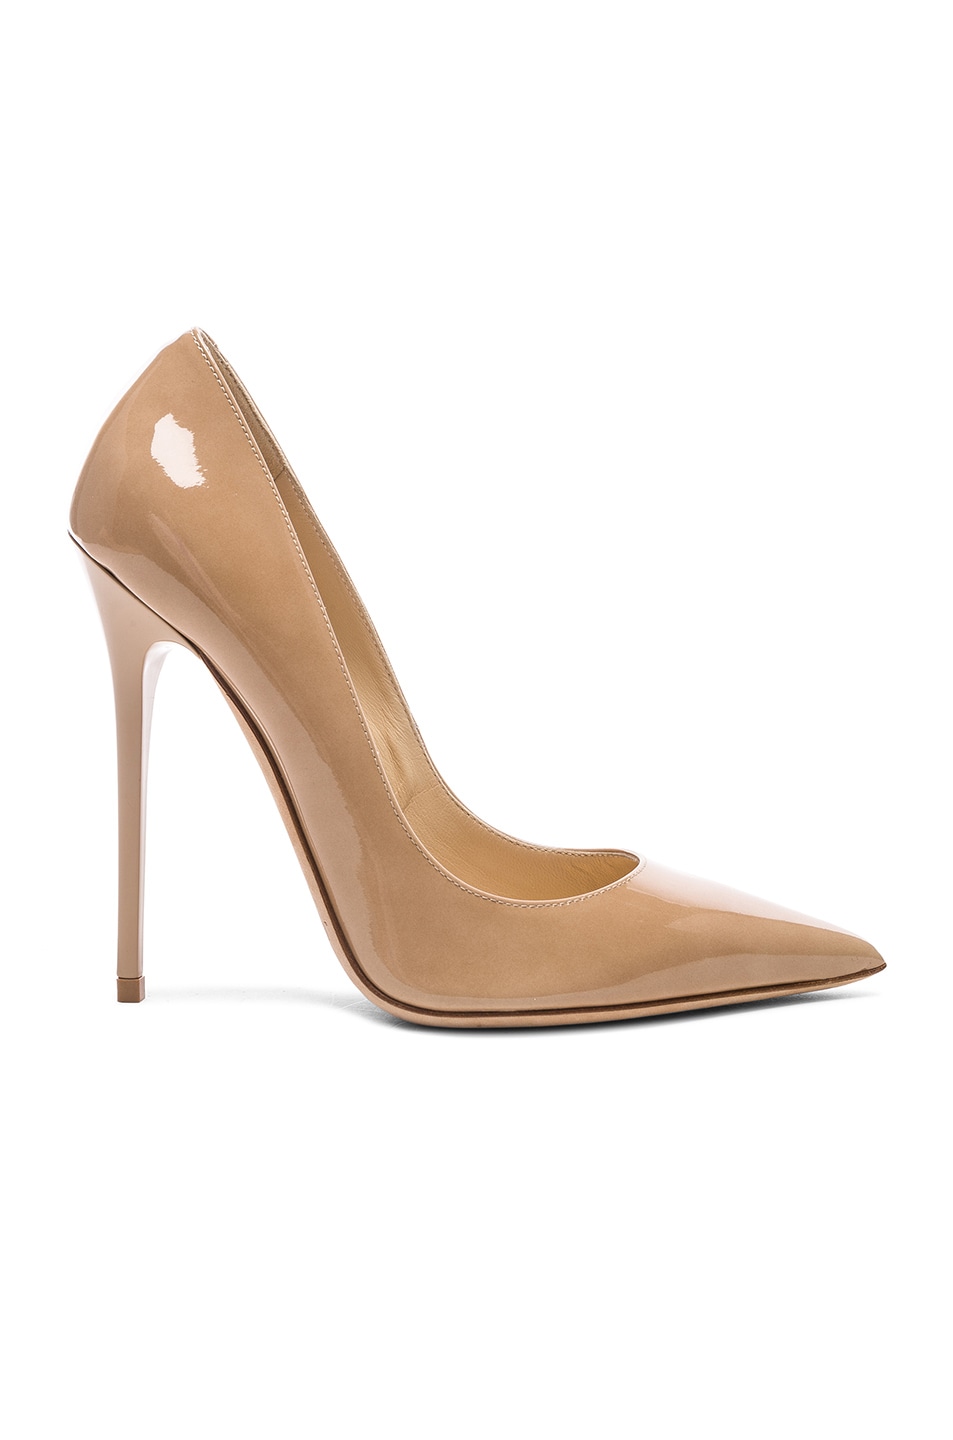 Image 1 of Jimmy Choo Anouk 120 Patent Leather Pump in Nude